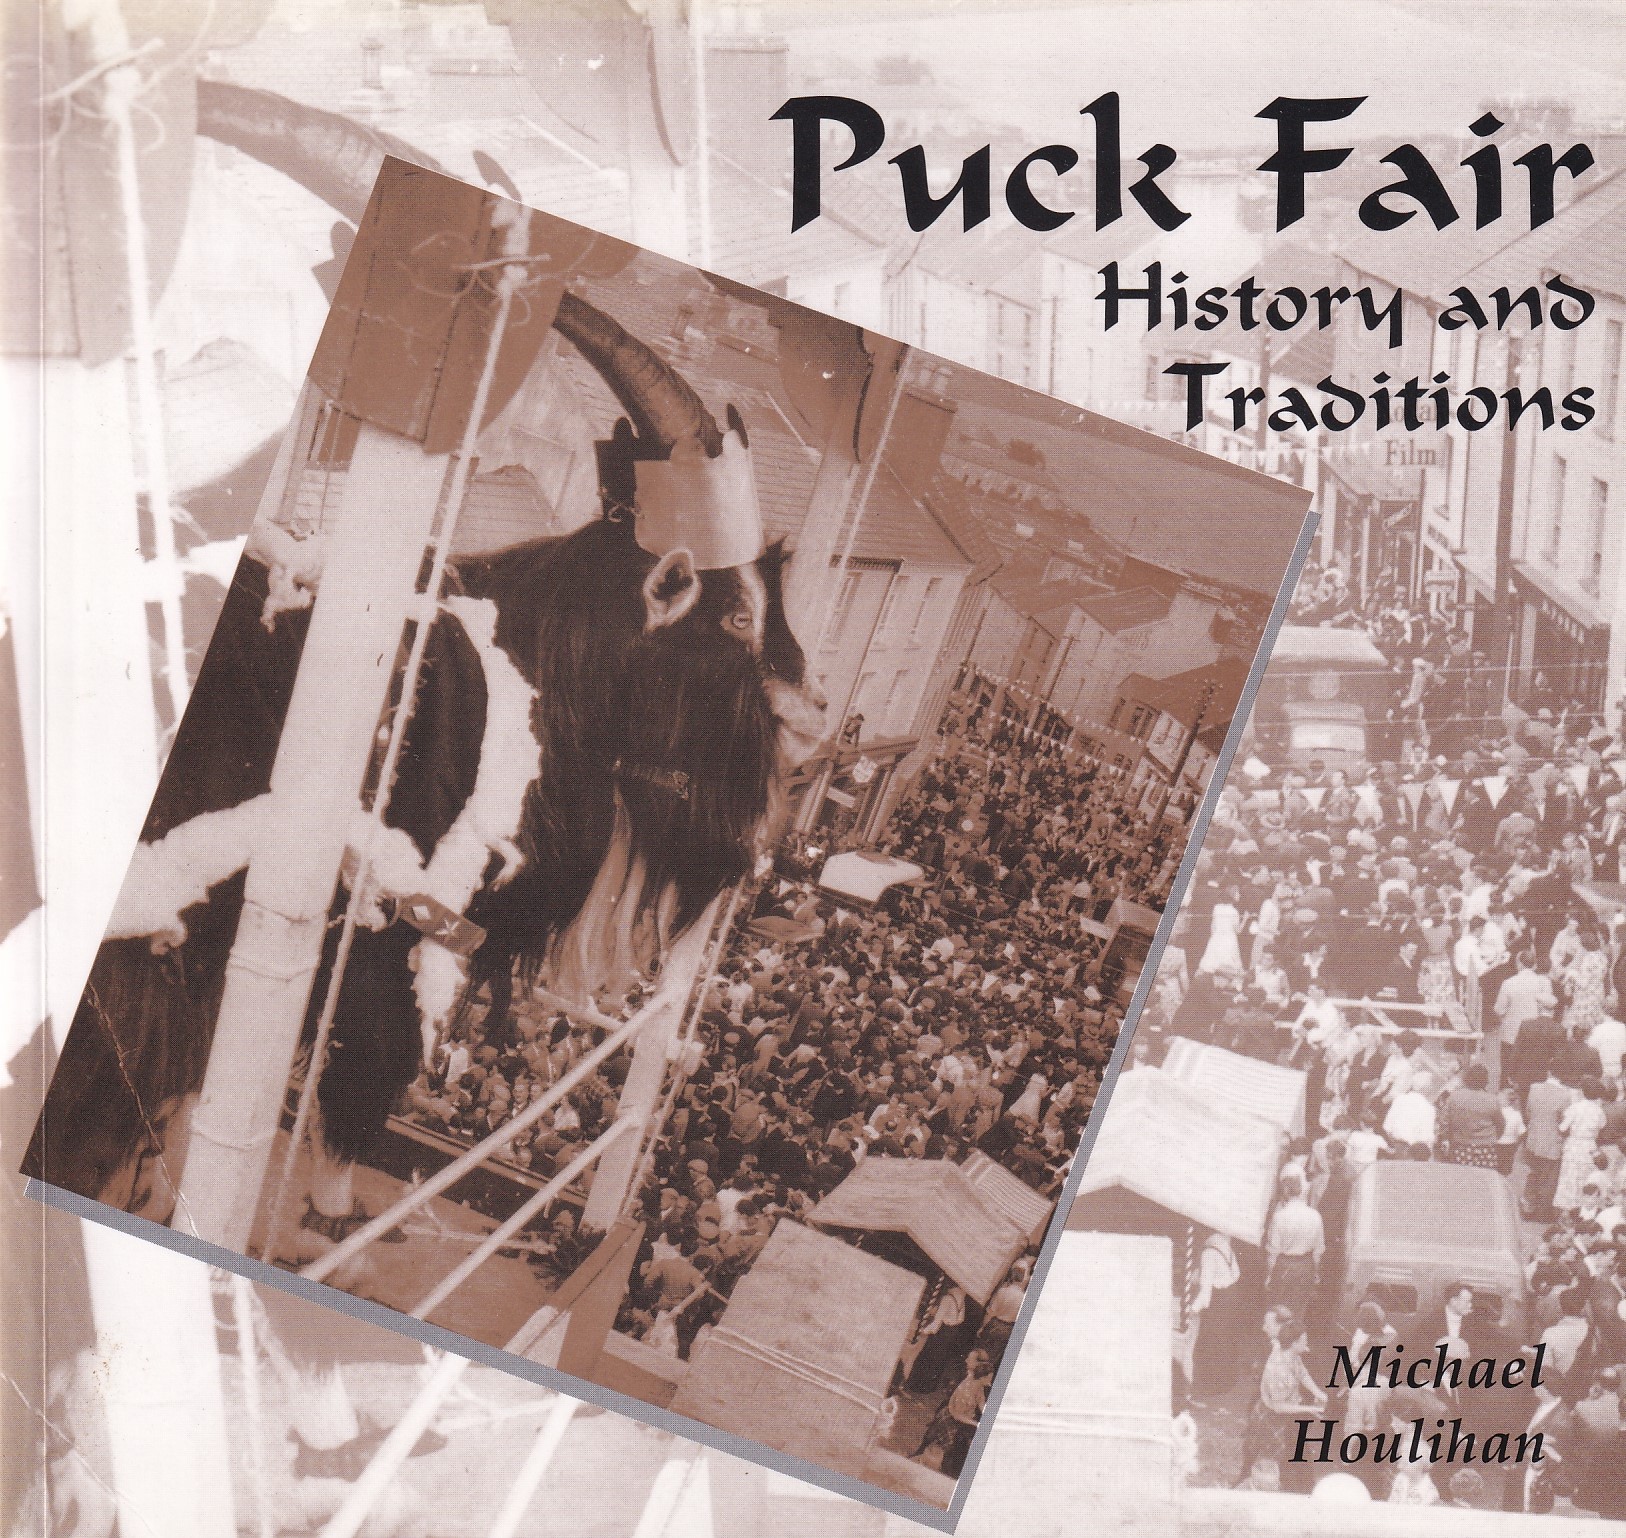 Puck Fair: History and Traditions | Michael Houlihan | Charlie Byrne's